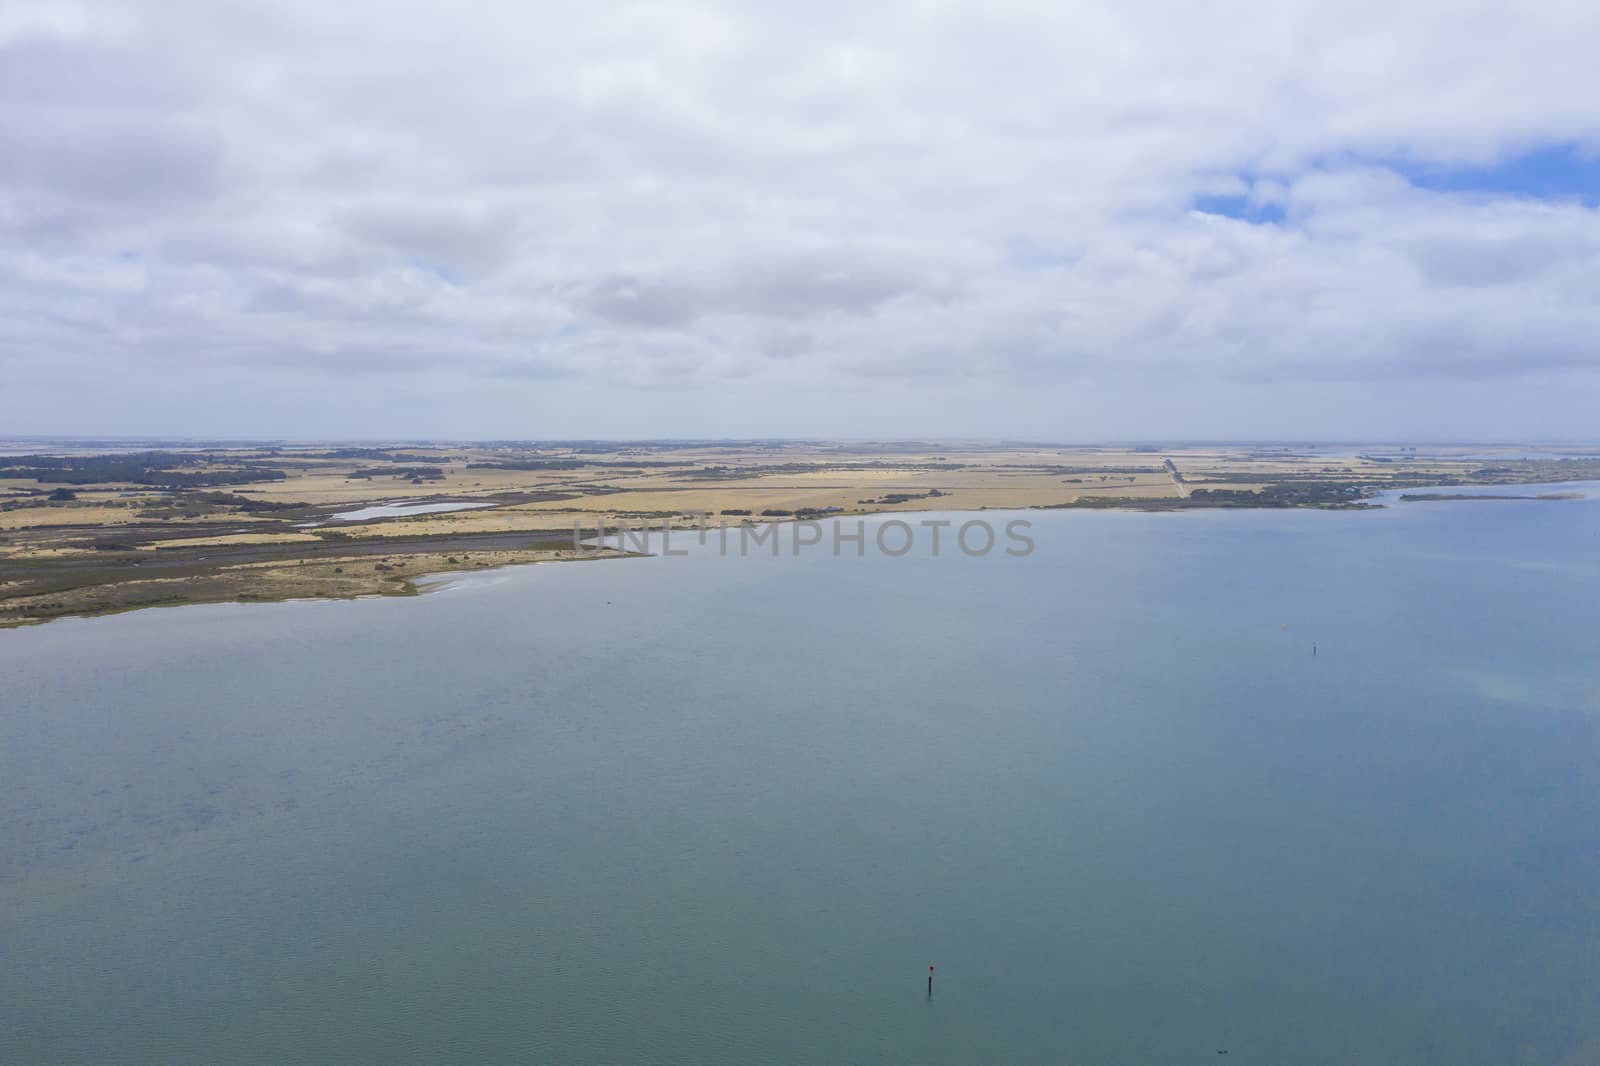 Aerial view of the estuary at Goolwa in regional South Australia in Australia by WittkePhotos